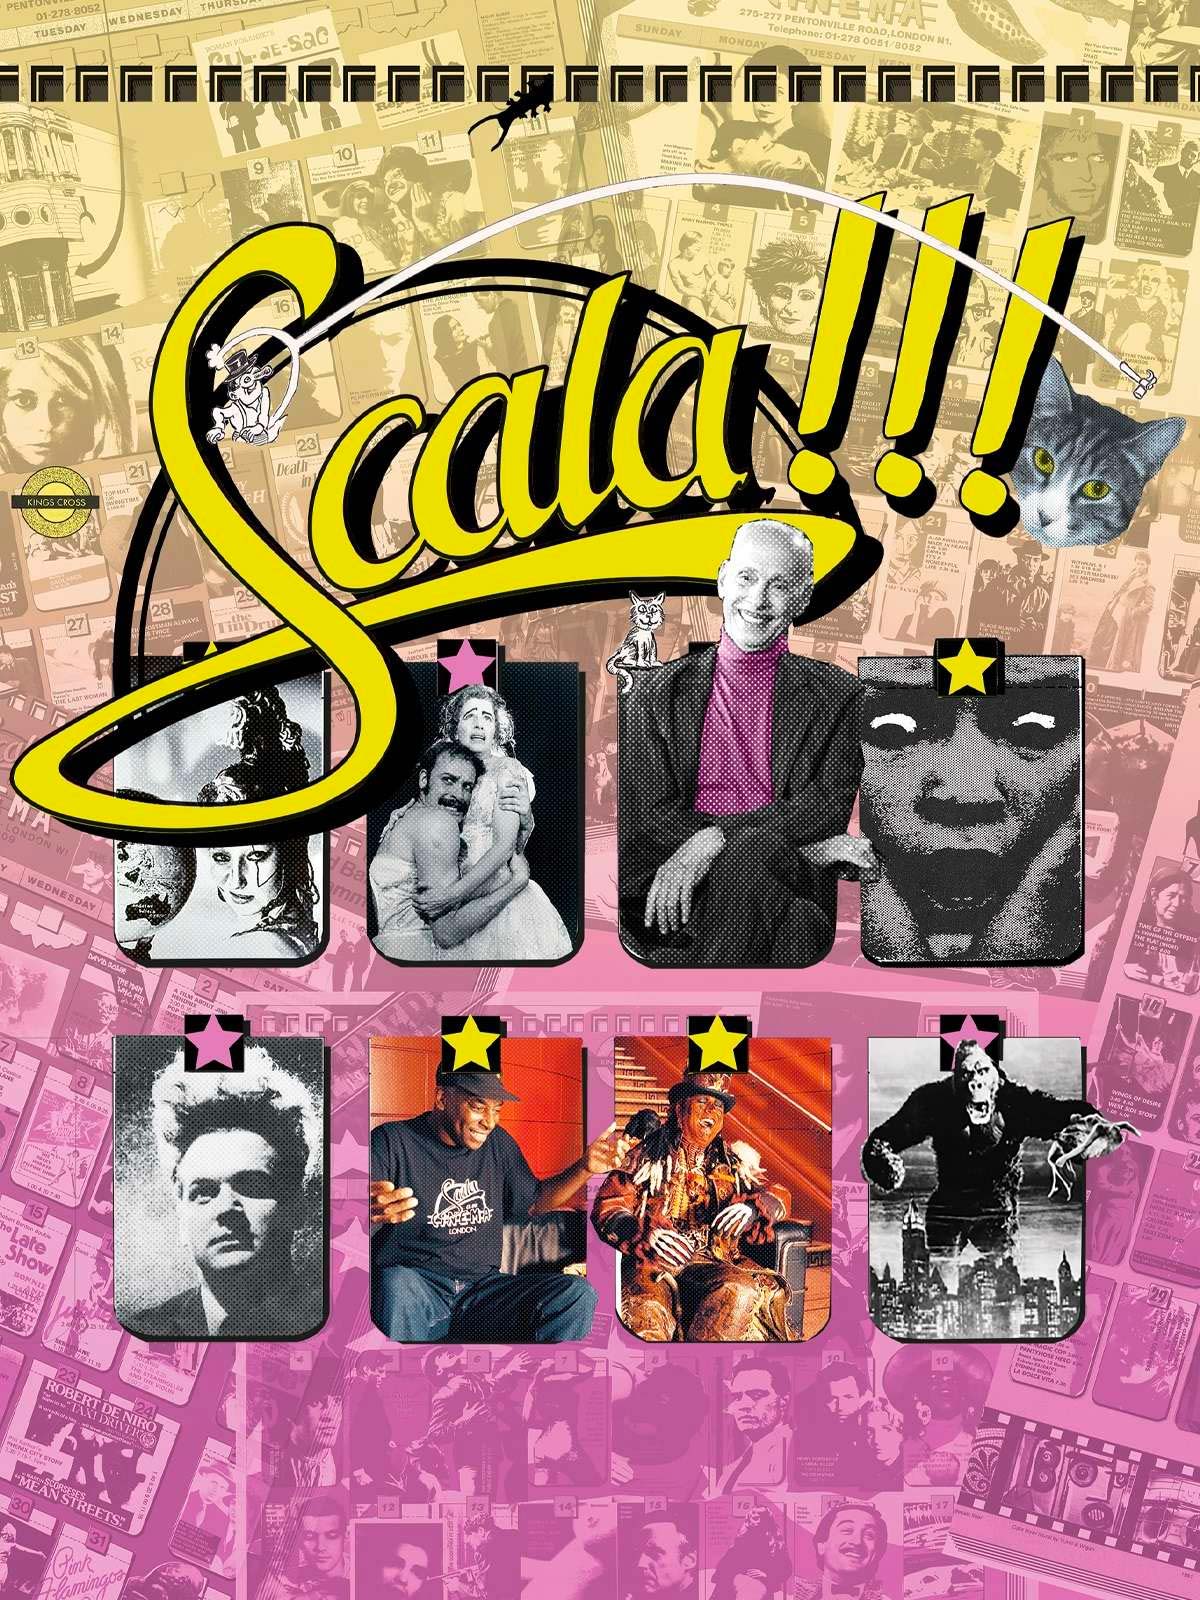 Promotional poster for Scala!!!